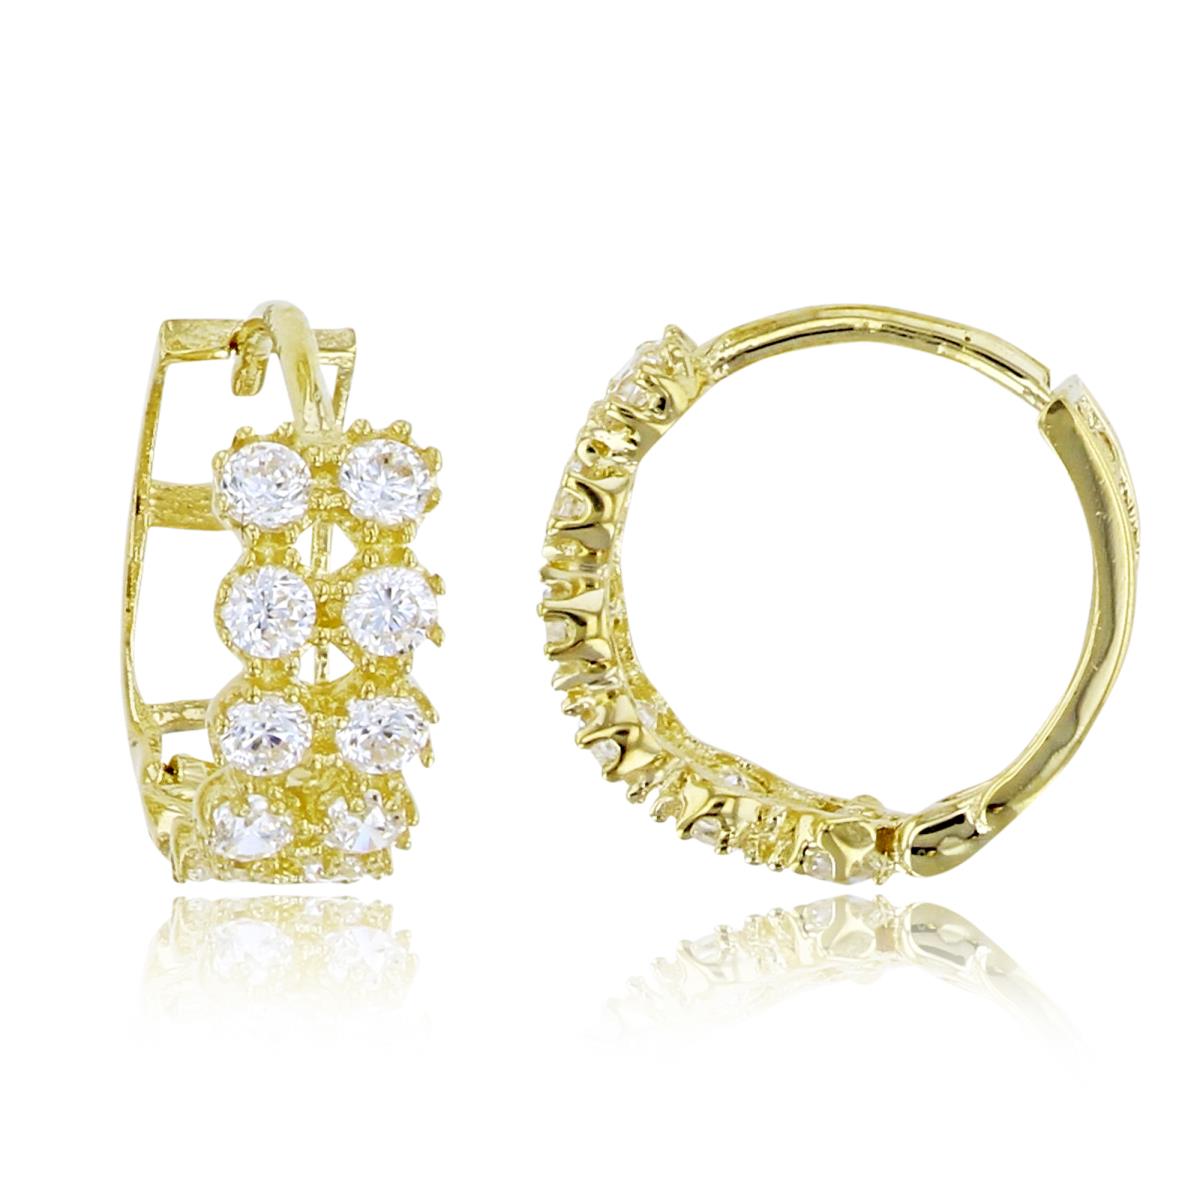 10K Yellow Gold Pave Round CZ 12X4mm Hoop Earring